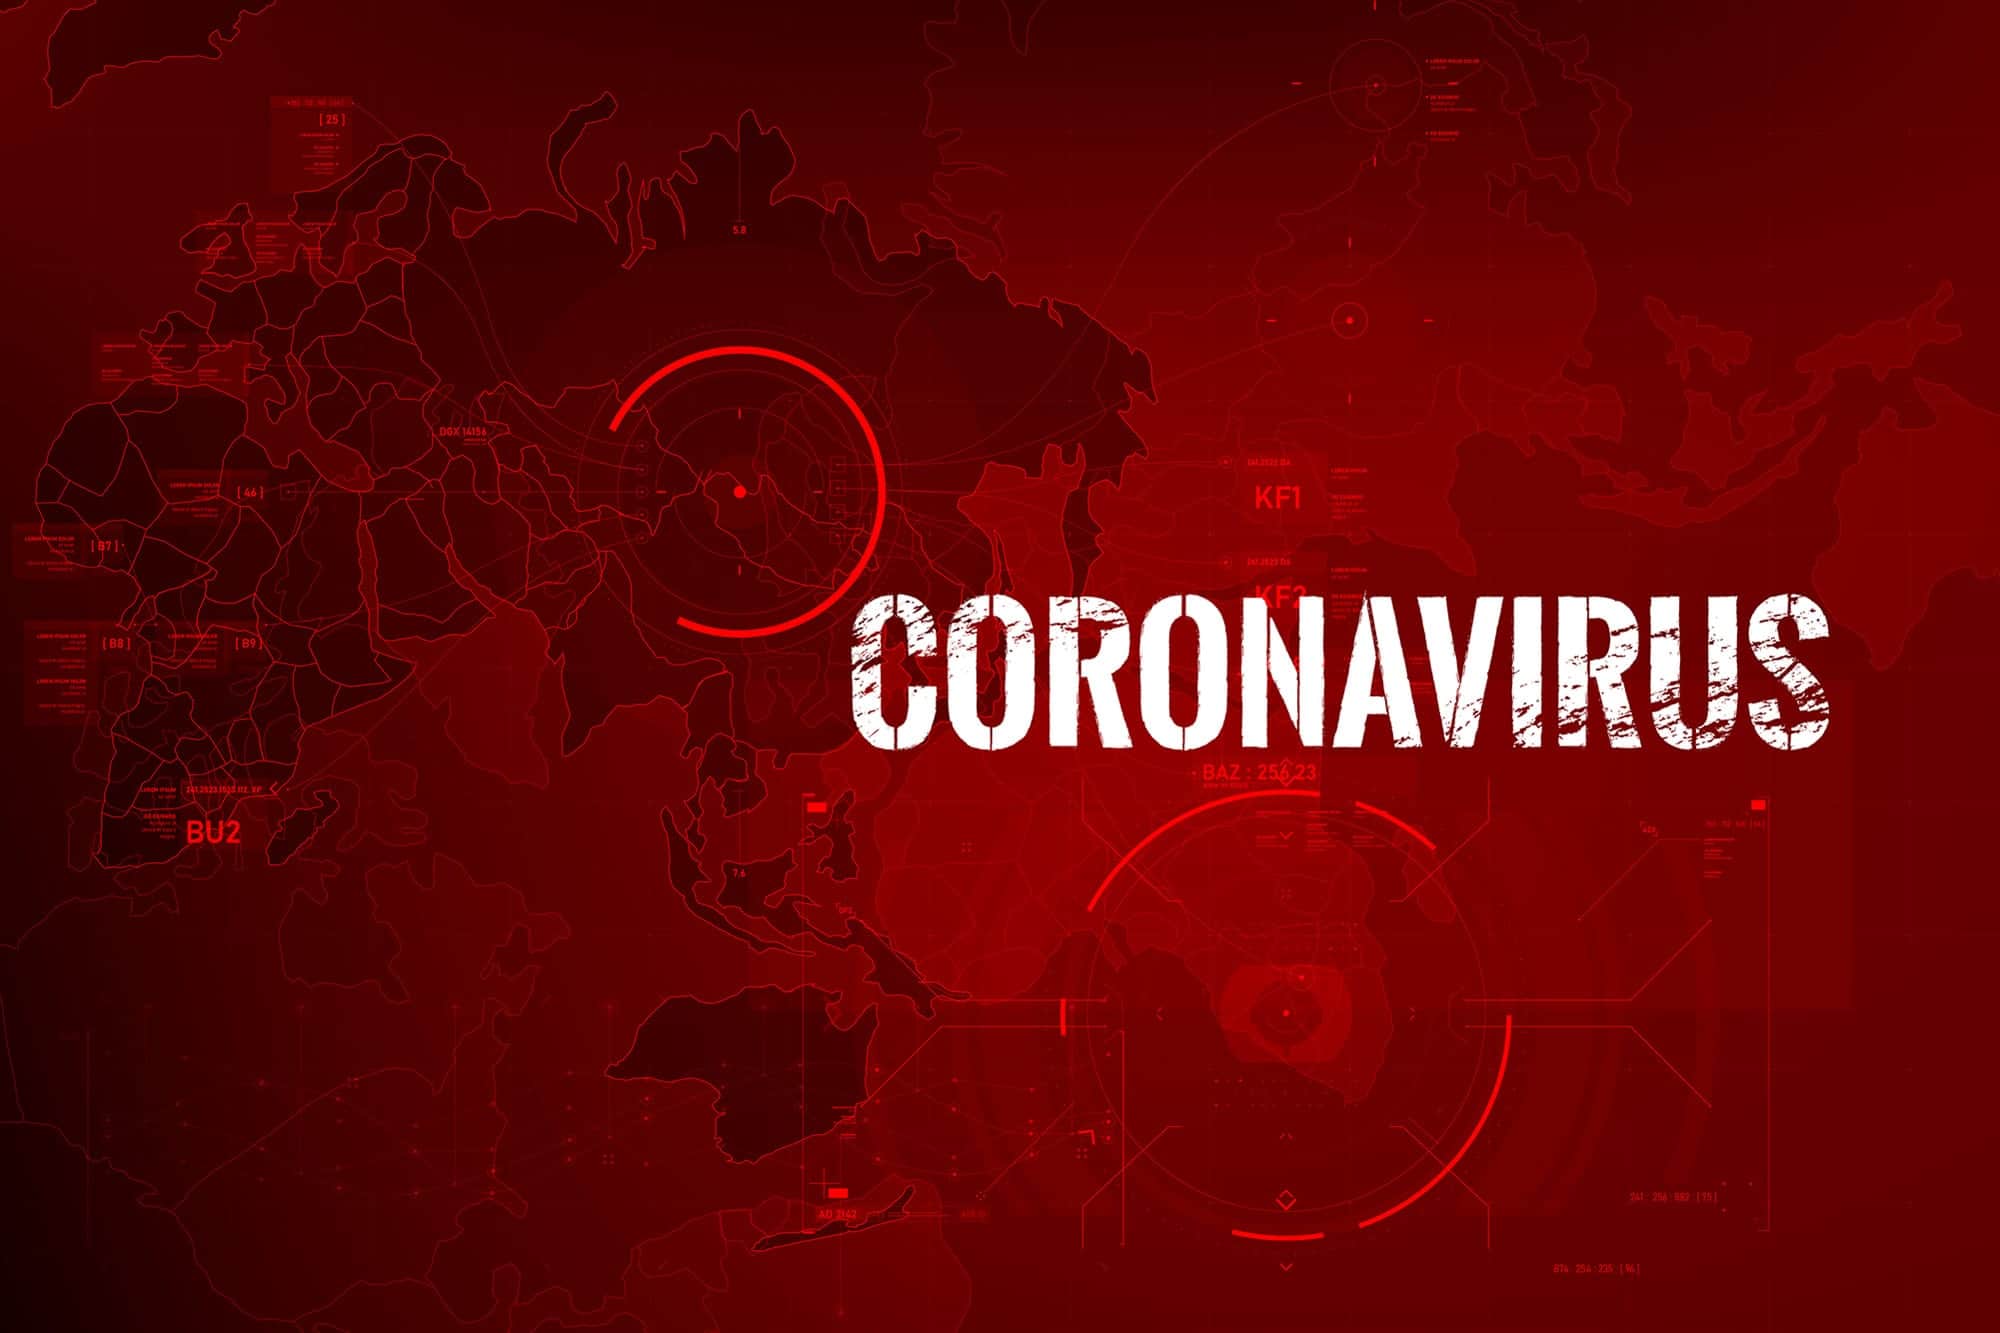 About the Coronavirus and what you need to know about staying safe...